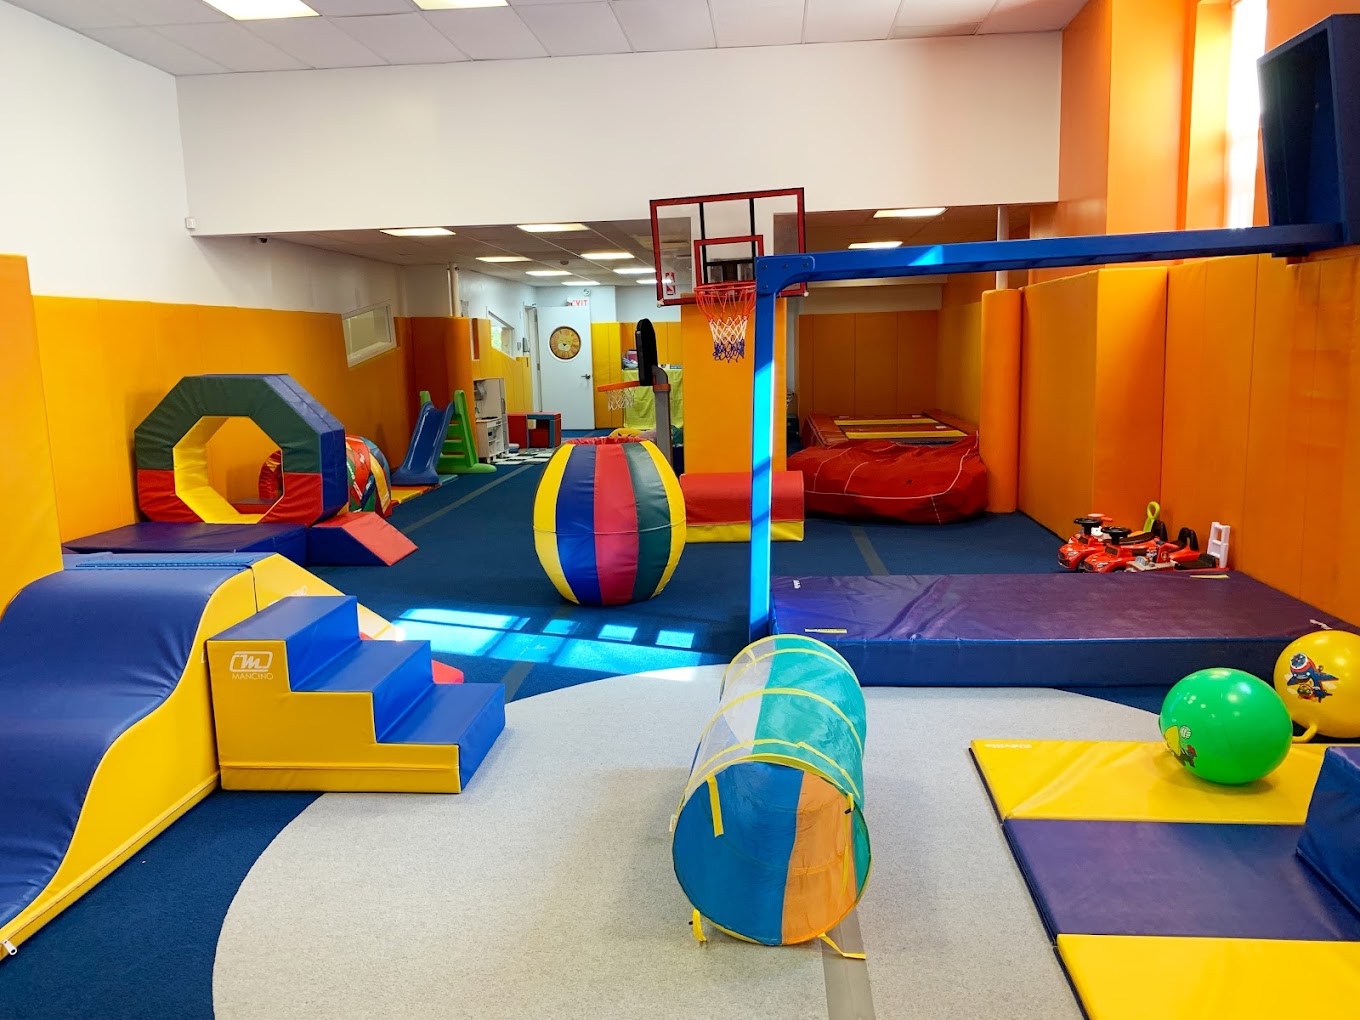 Best drop-in indoor activities for kids in Brooklyn  Brooklyn Bridge  Parents - News and Events for Brooklyn families